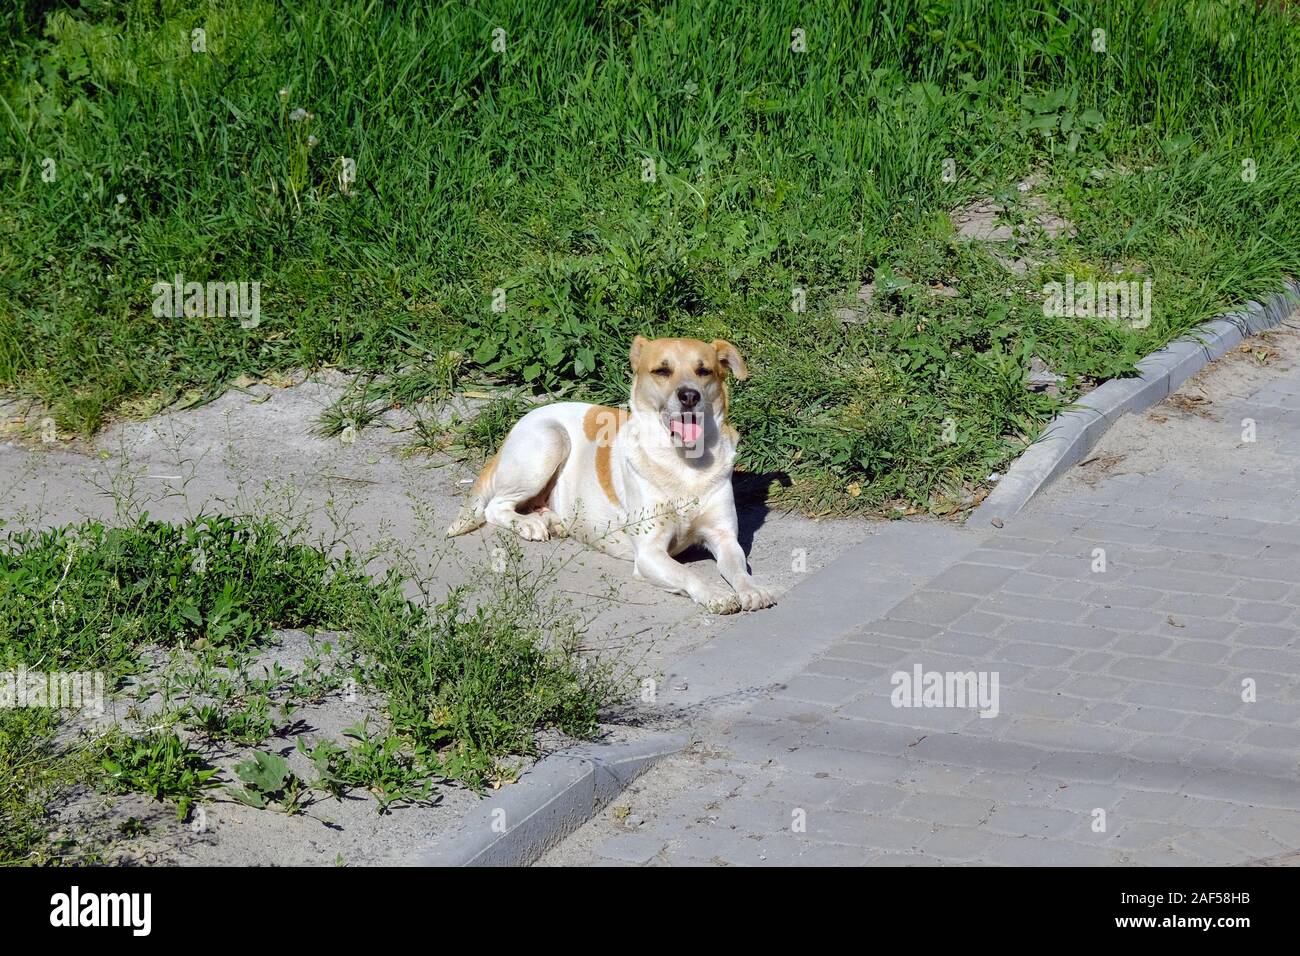 A white dog with brown spots lies on the road with its tongue sticking out. The mongrel lies basking in the sun in summer. Stock Photo